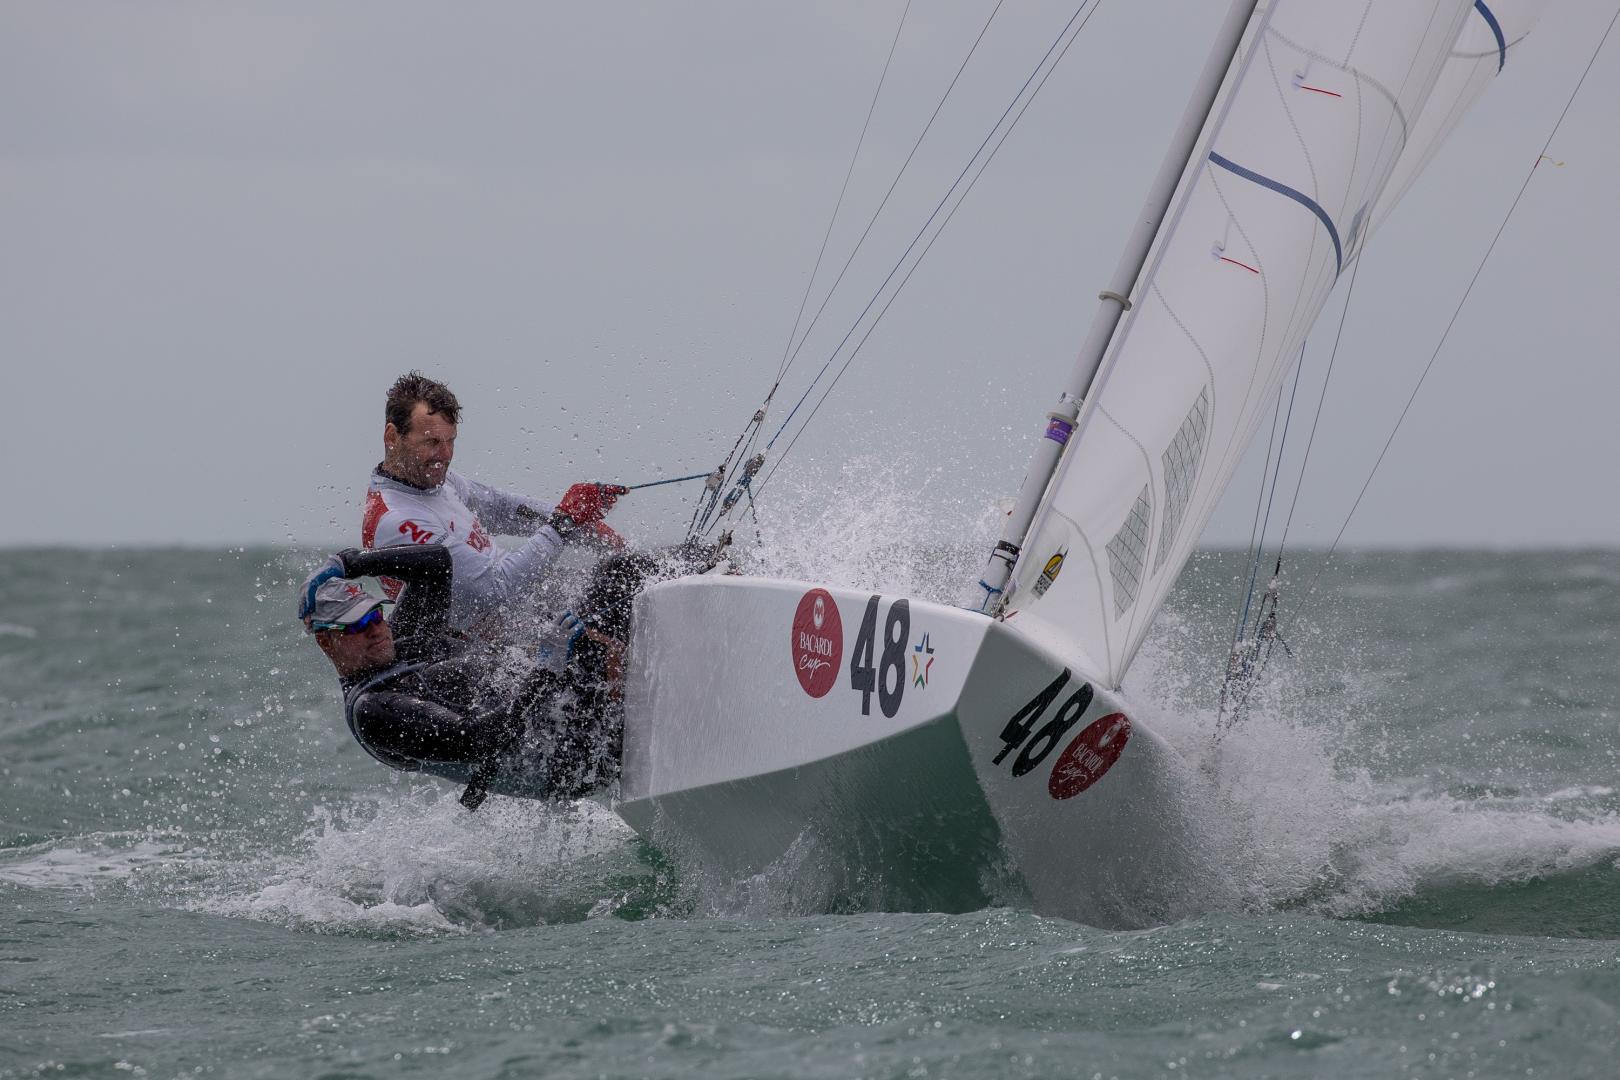 An epic opening day at the 94th Bacardi Cup on Biscayne Bay